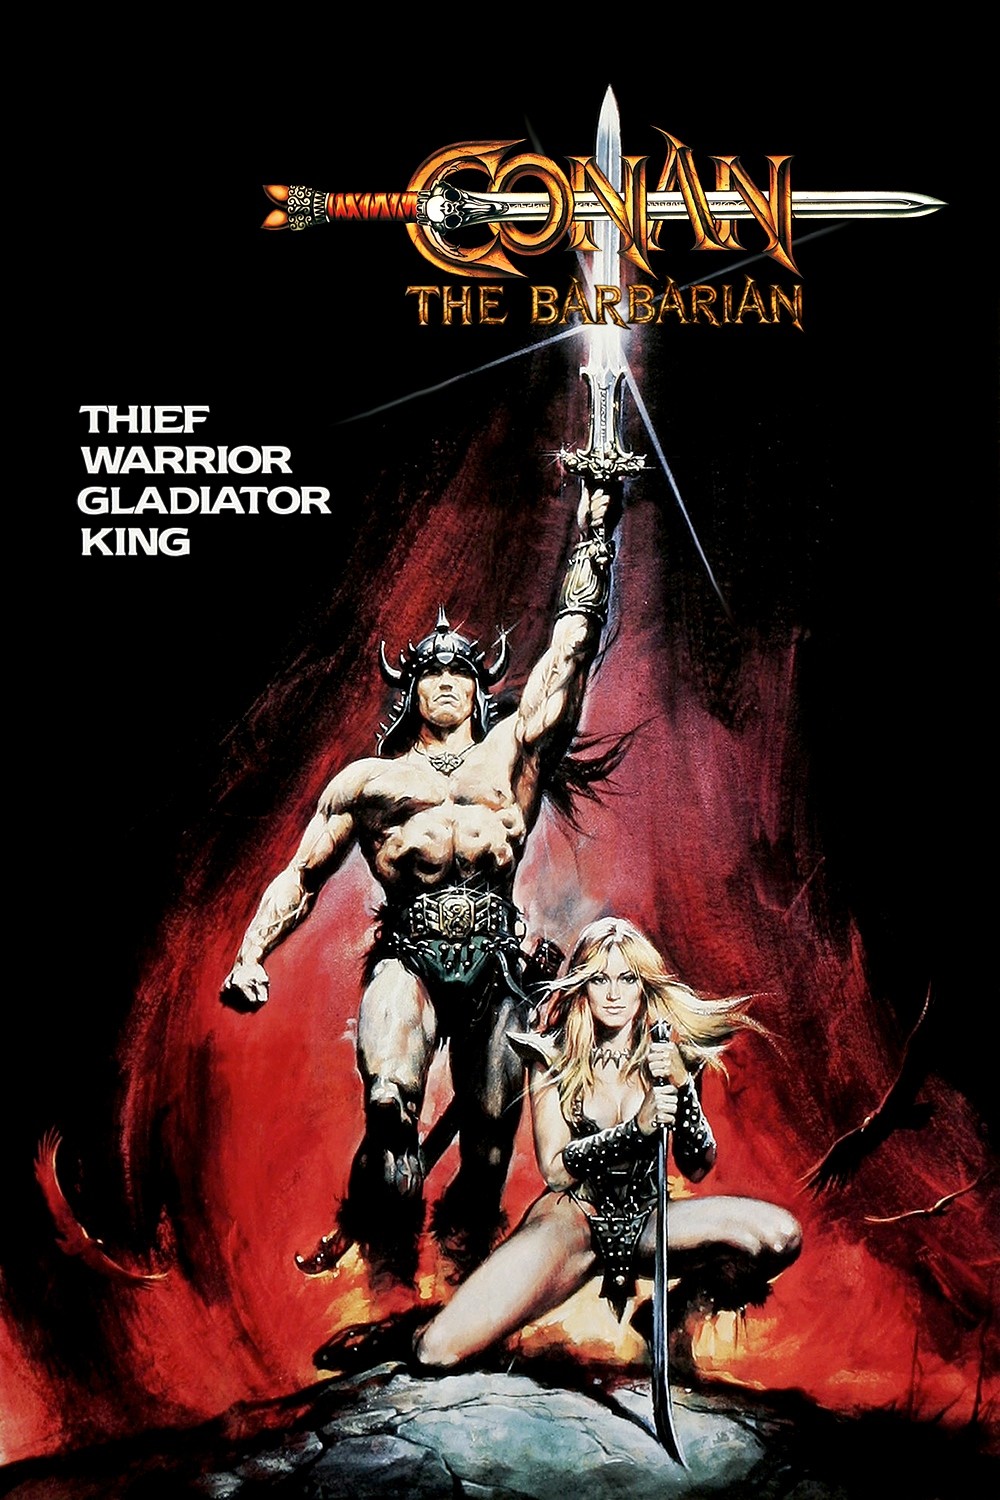 Amazing Conan The Barbarian (1982) Pictures & Backgrounds